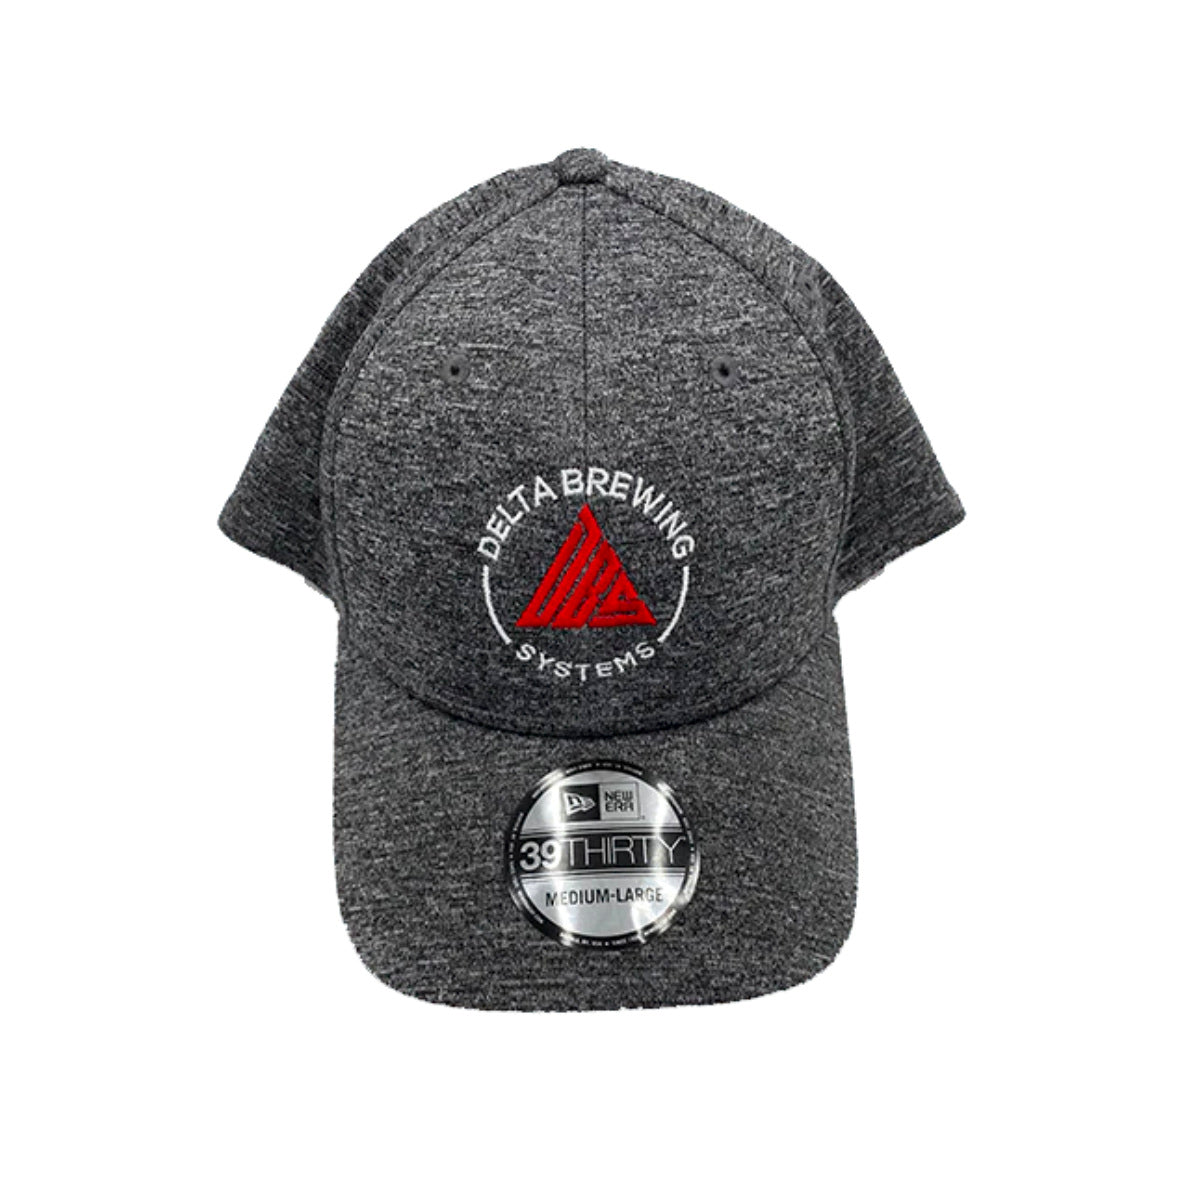 Home brewing hat